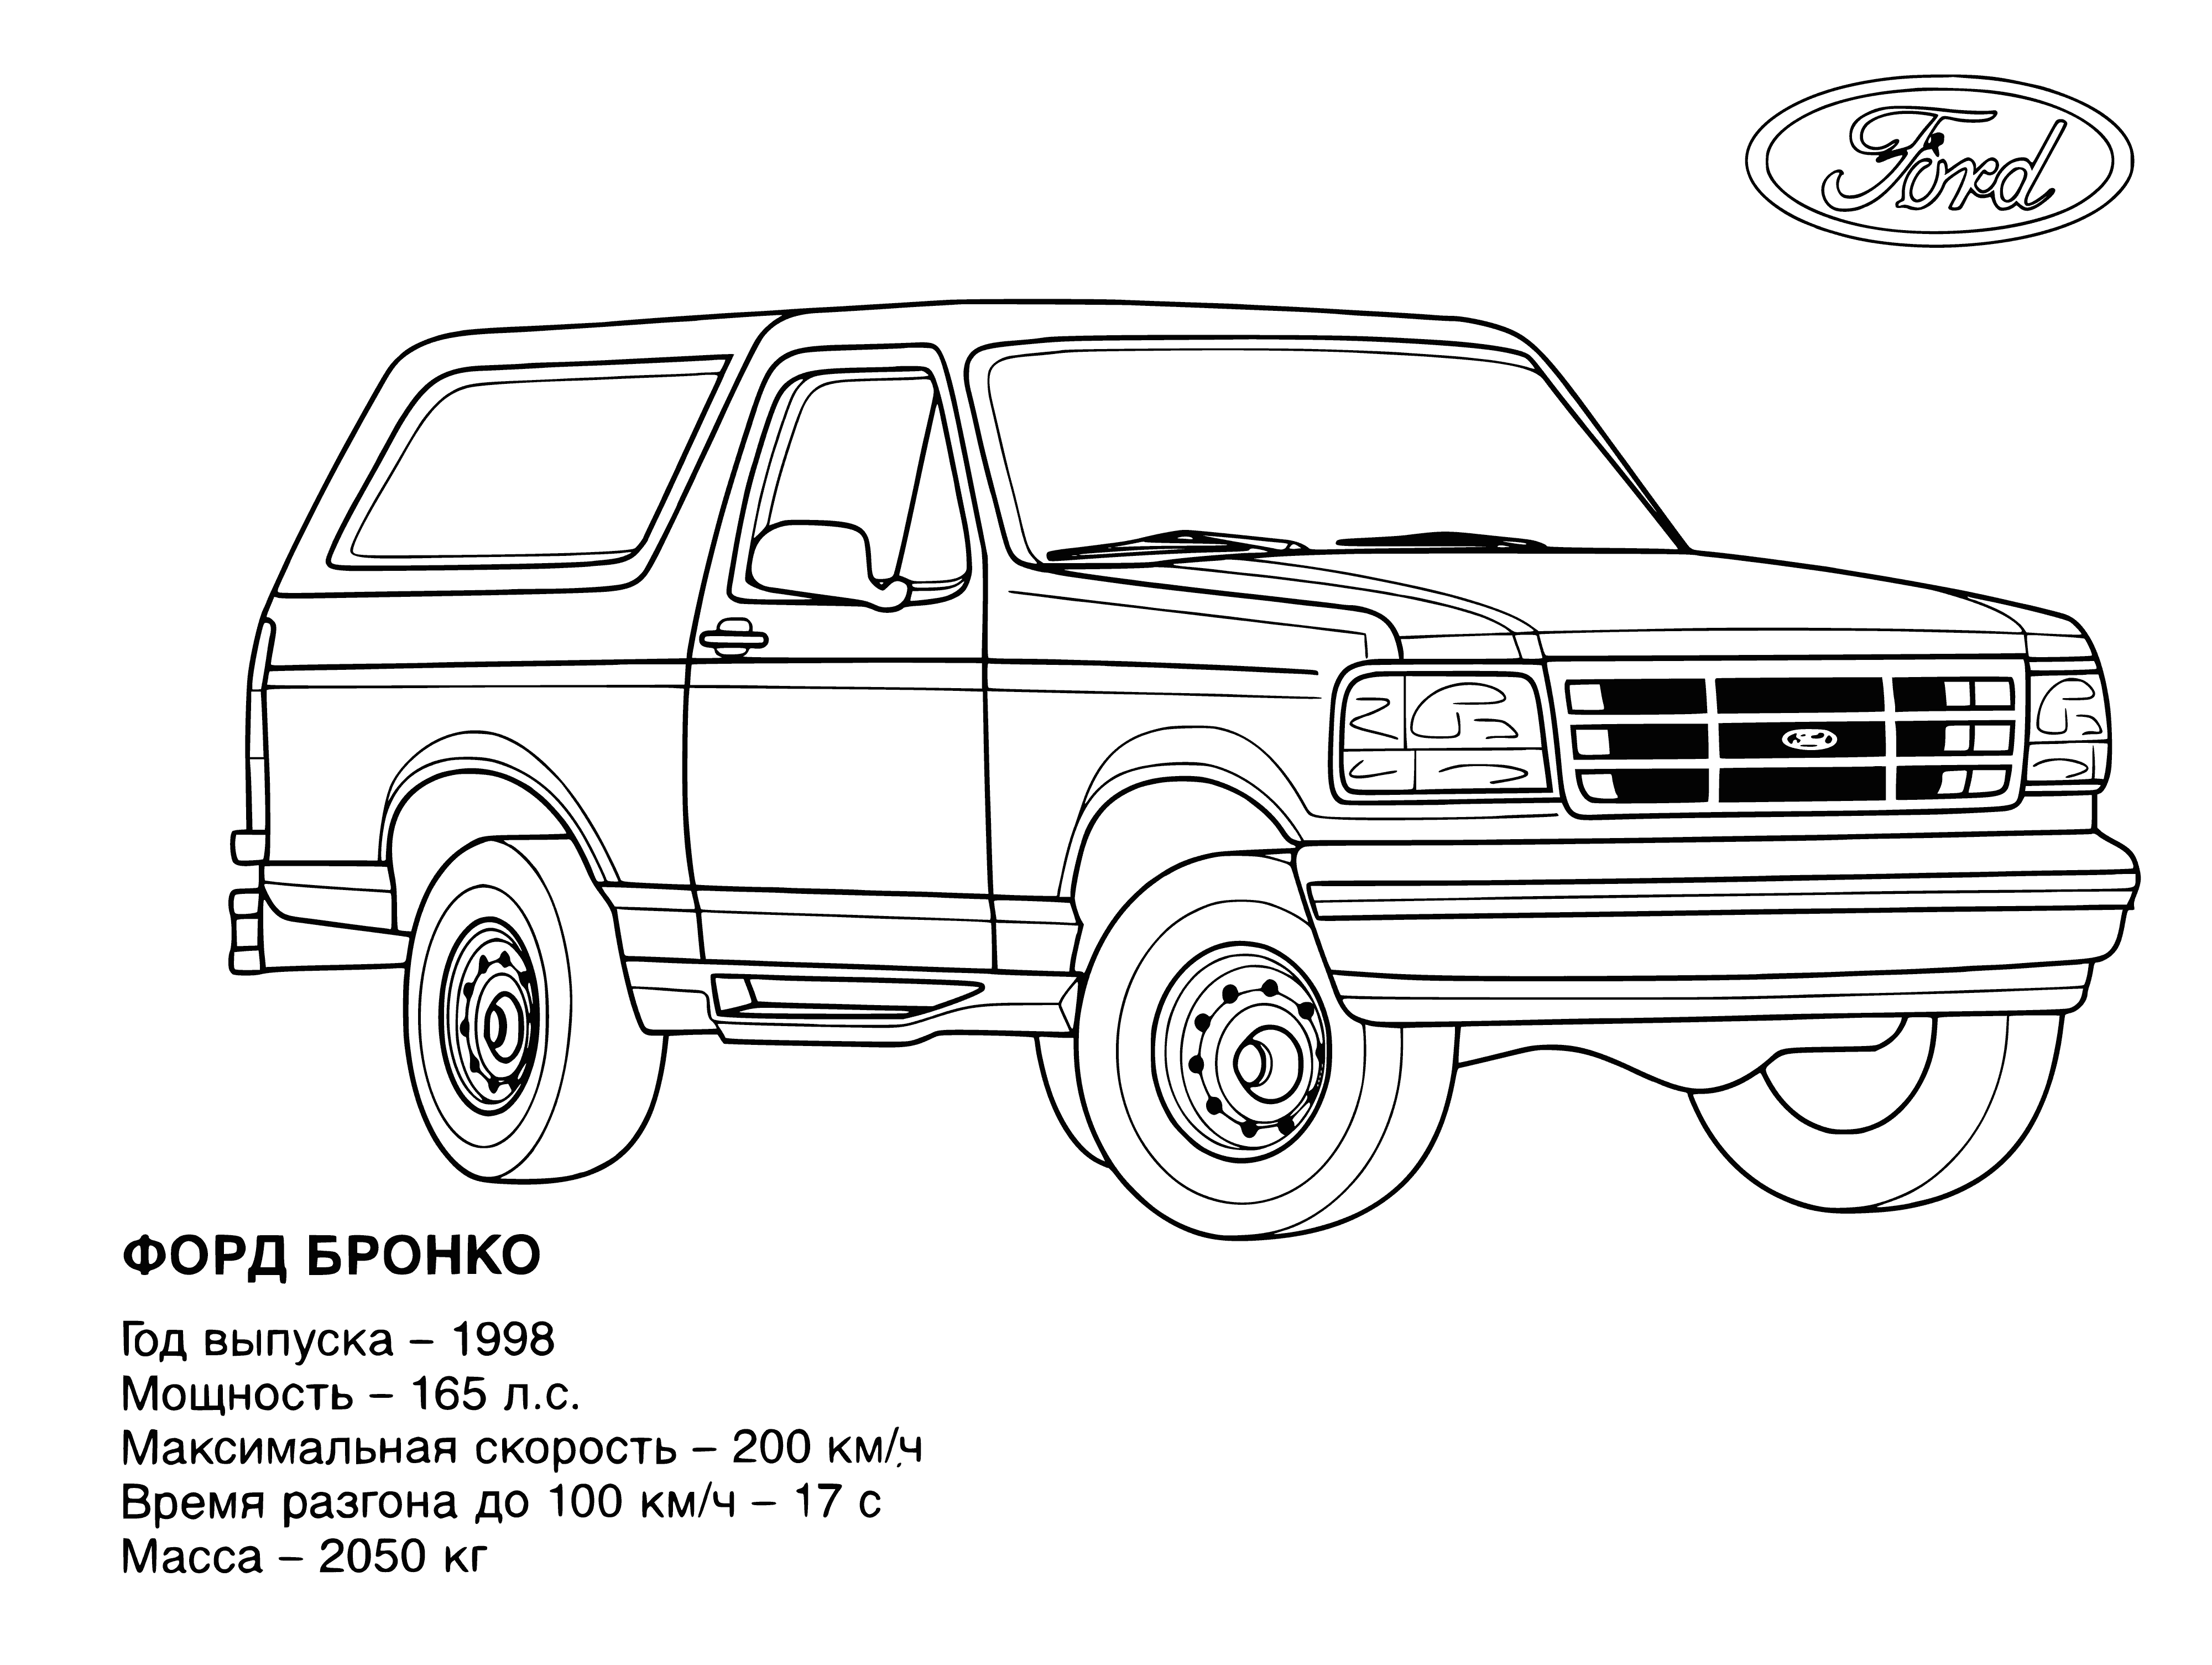 Ford coloring page